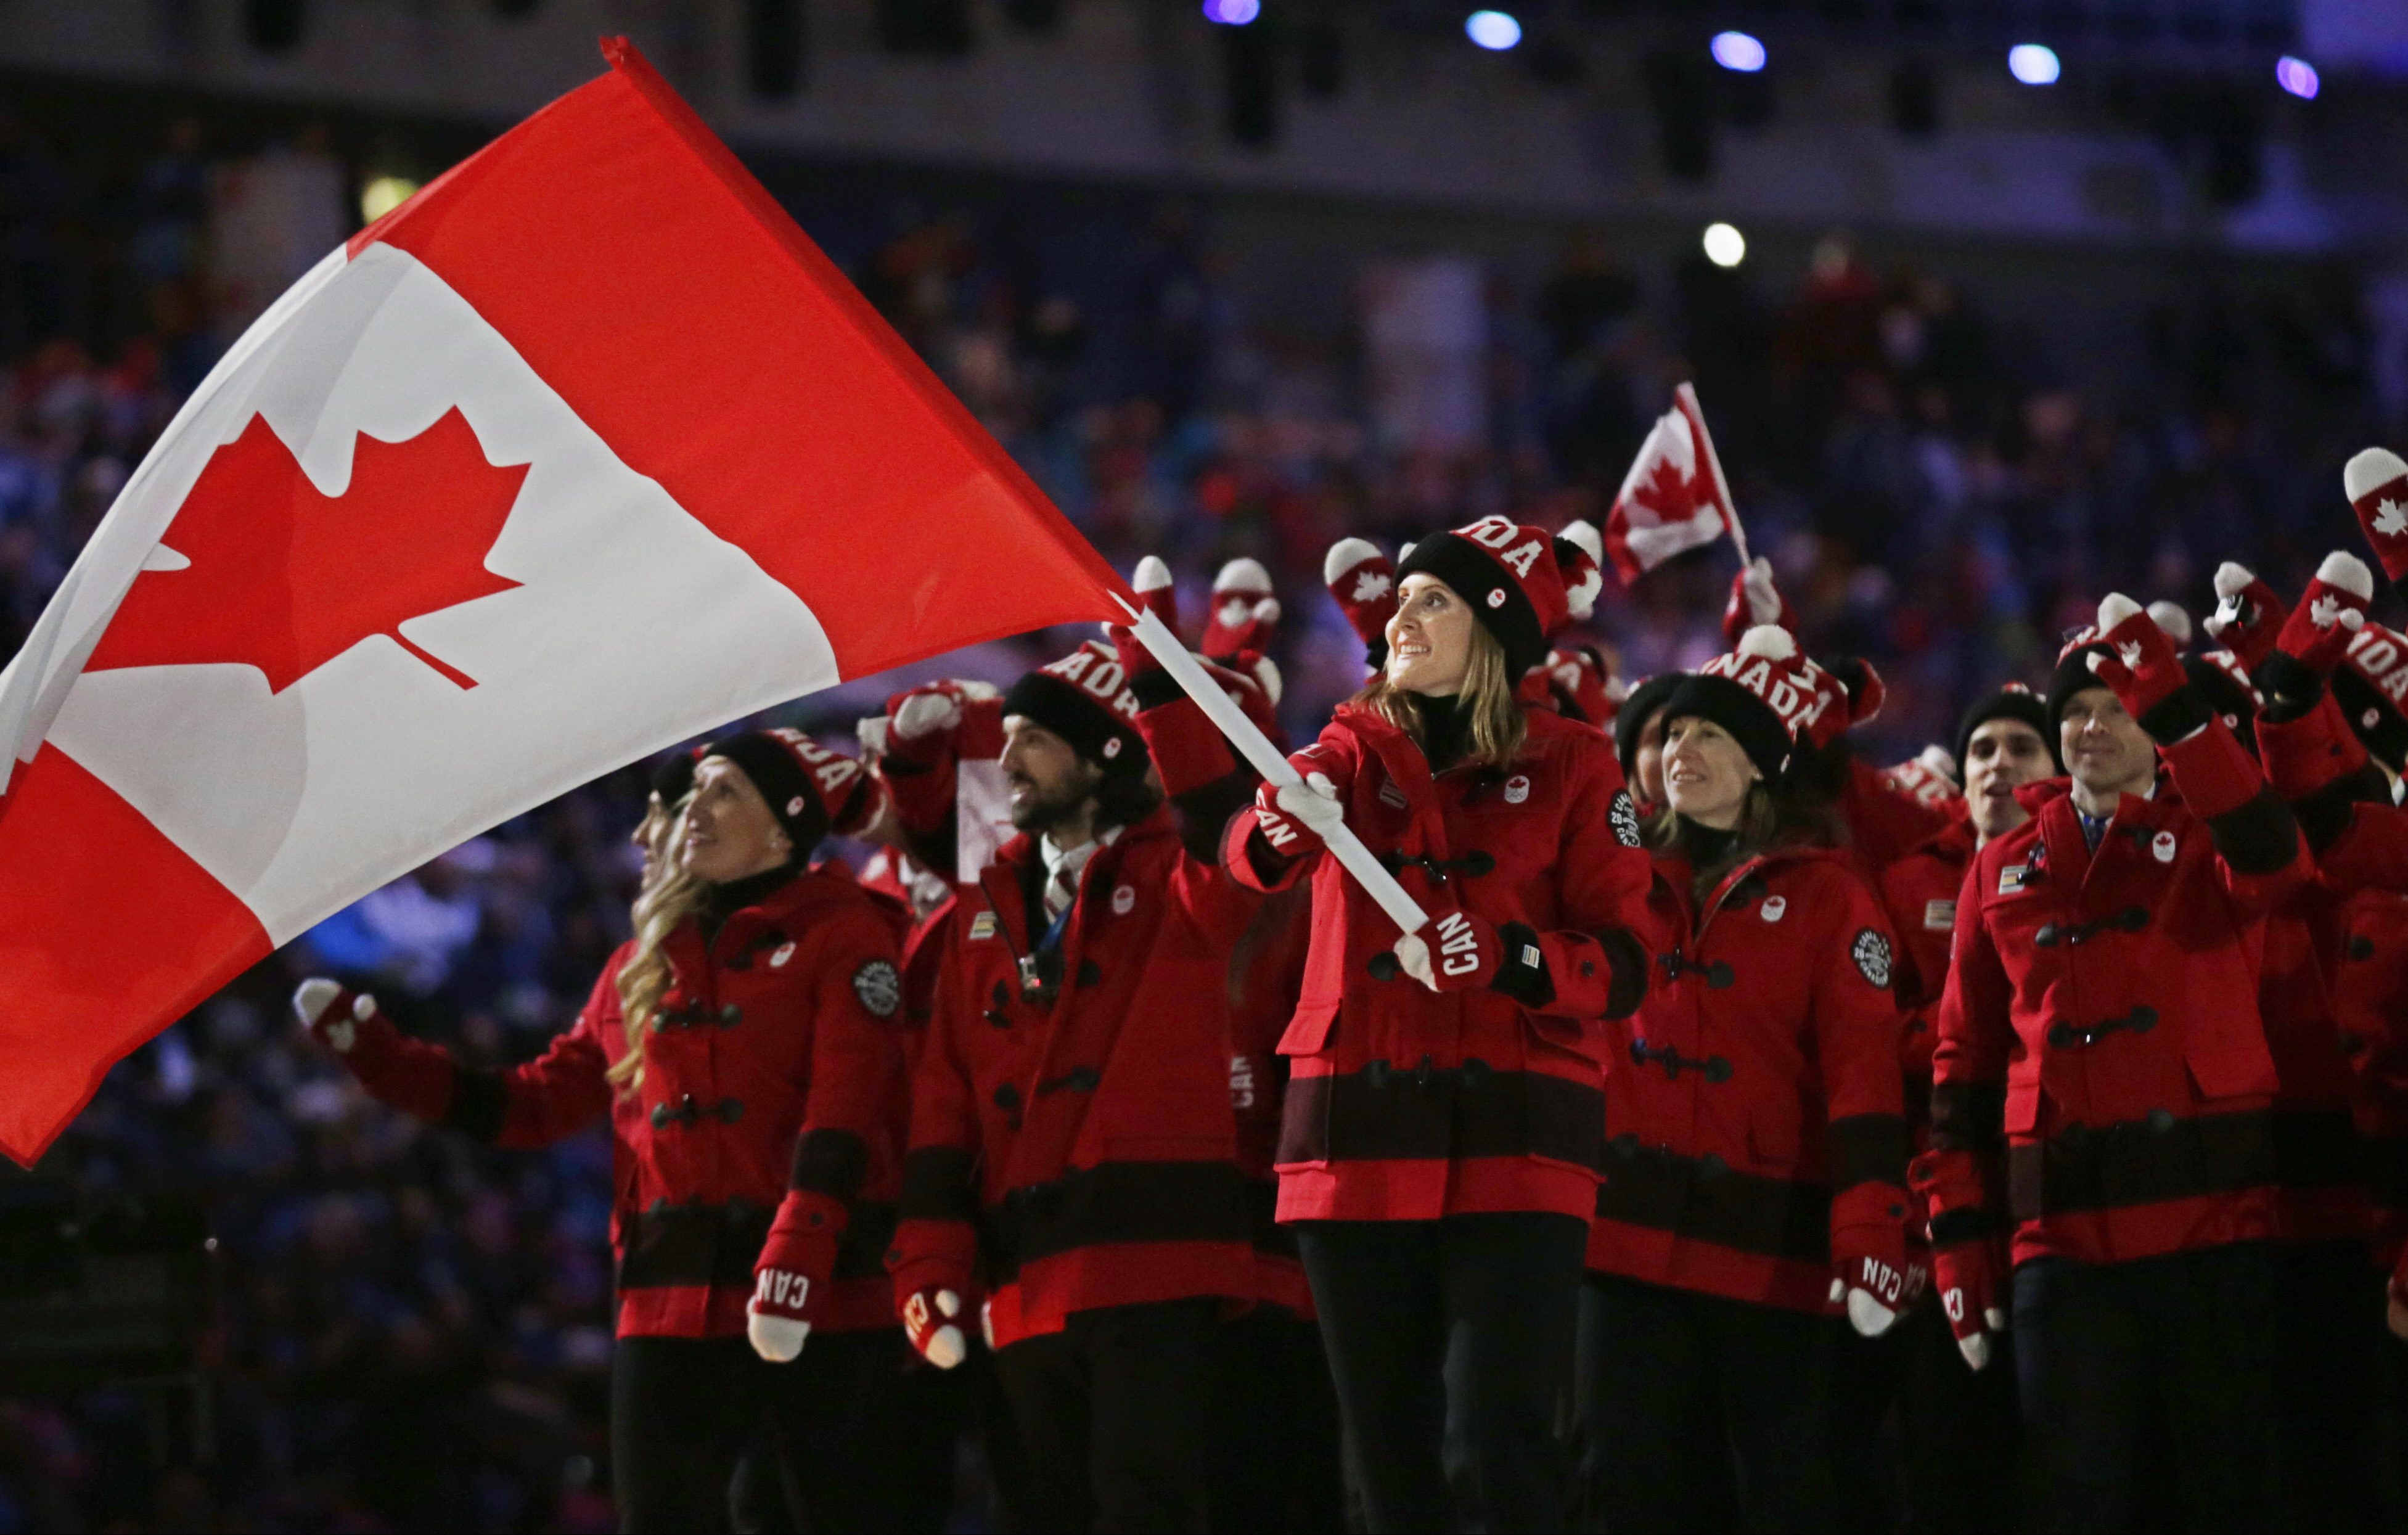 Hayley Wickenheiser of Canada carries her country flag as they arrive during the opening ceremony of the 2014 Winter Olympics in Sochi, Russia, Friday, Feb. 7, 2014. (AP Photo/Matt Dunham)